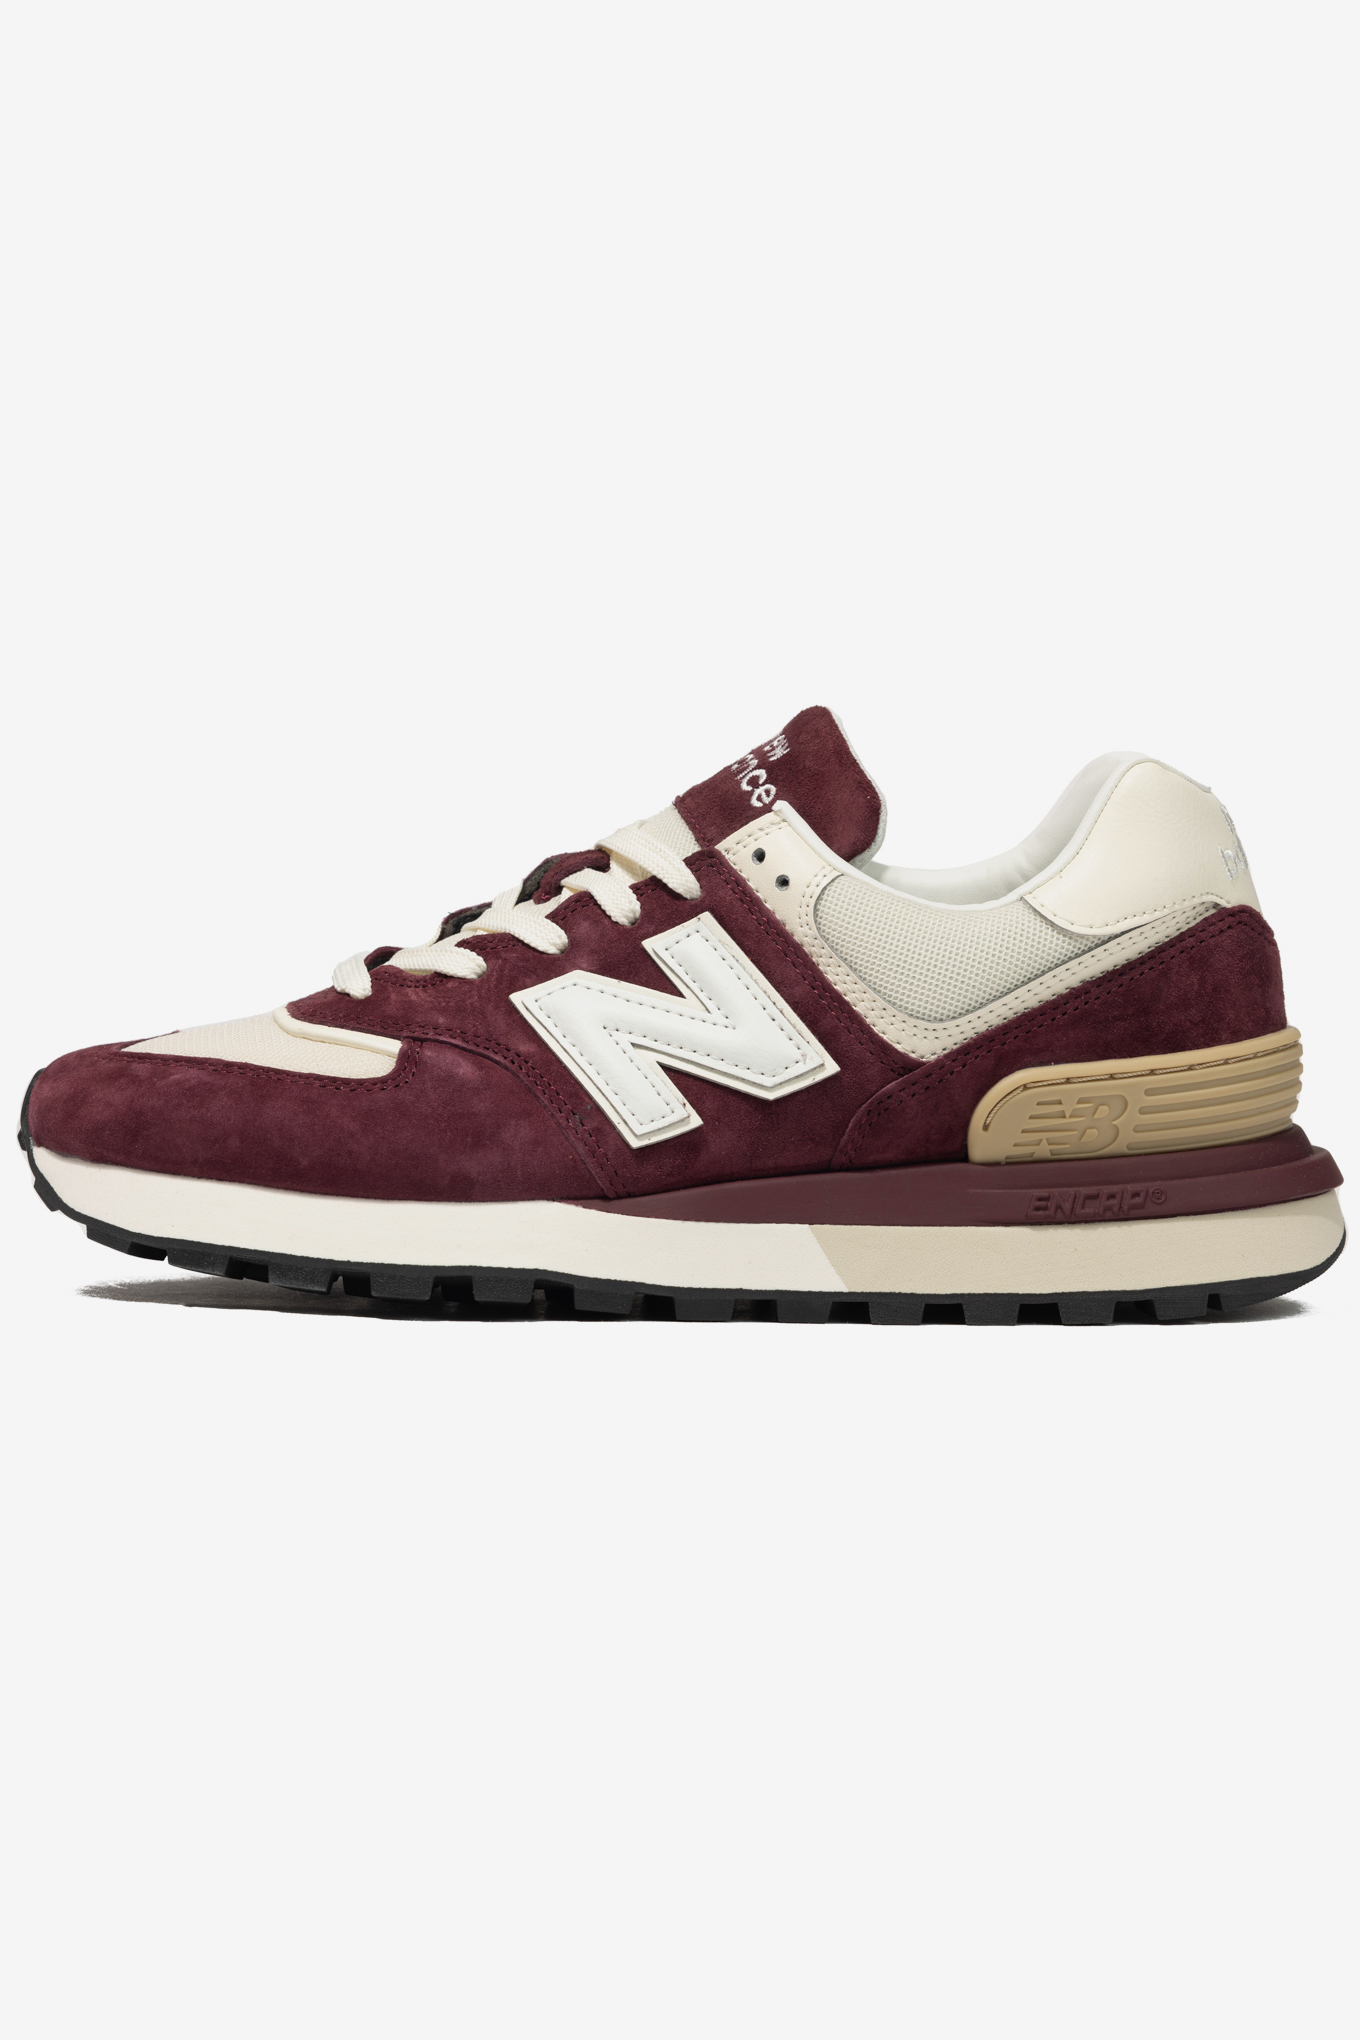 New Balance's 574 Legacy sneaker in brown suede